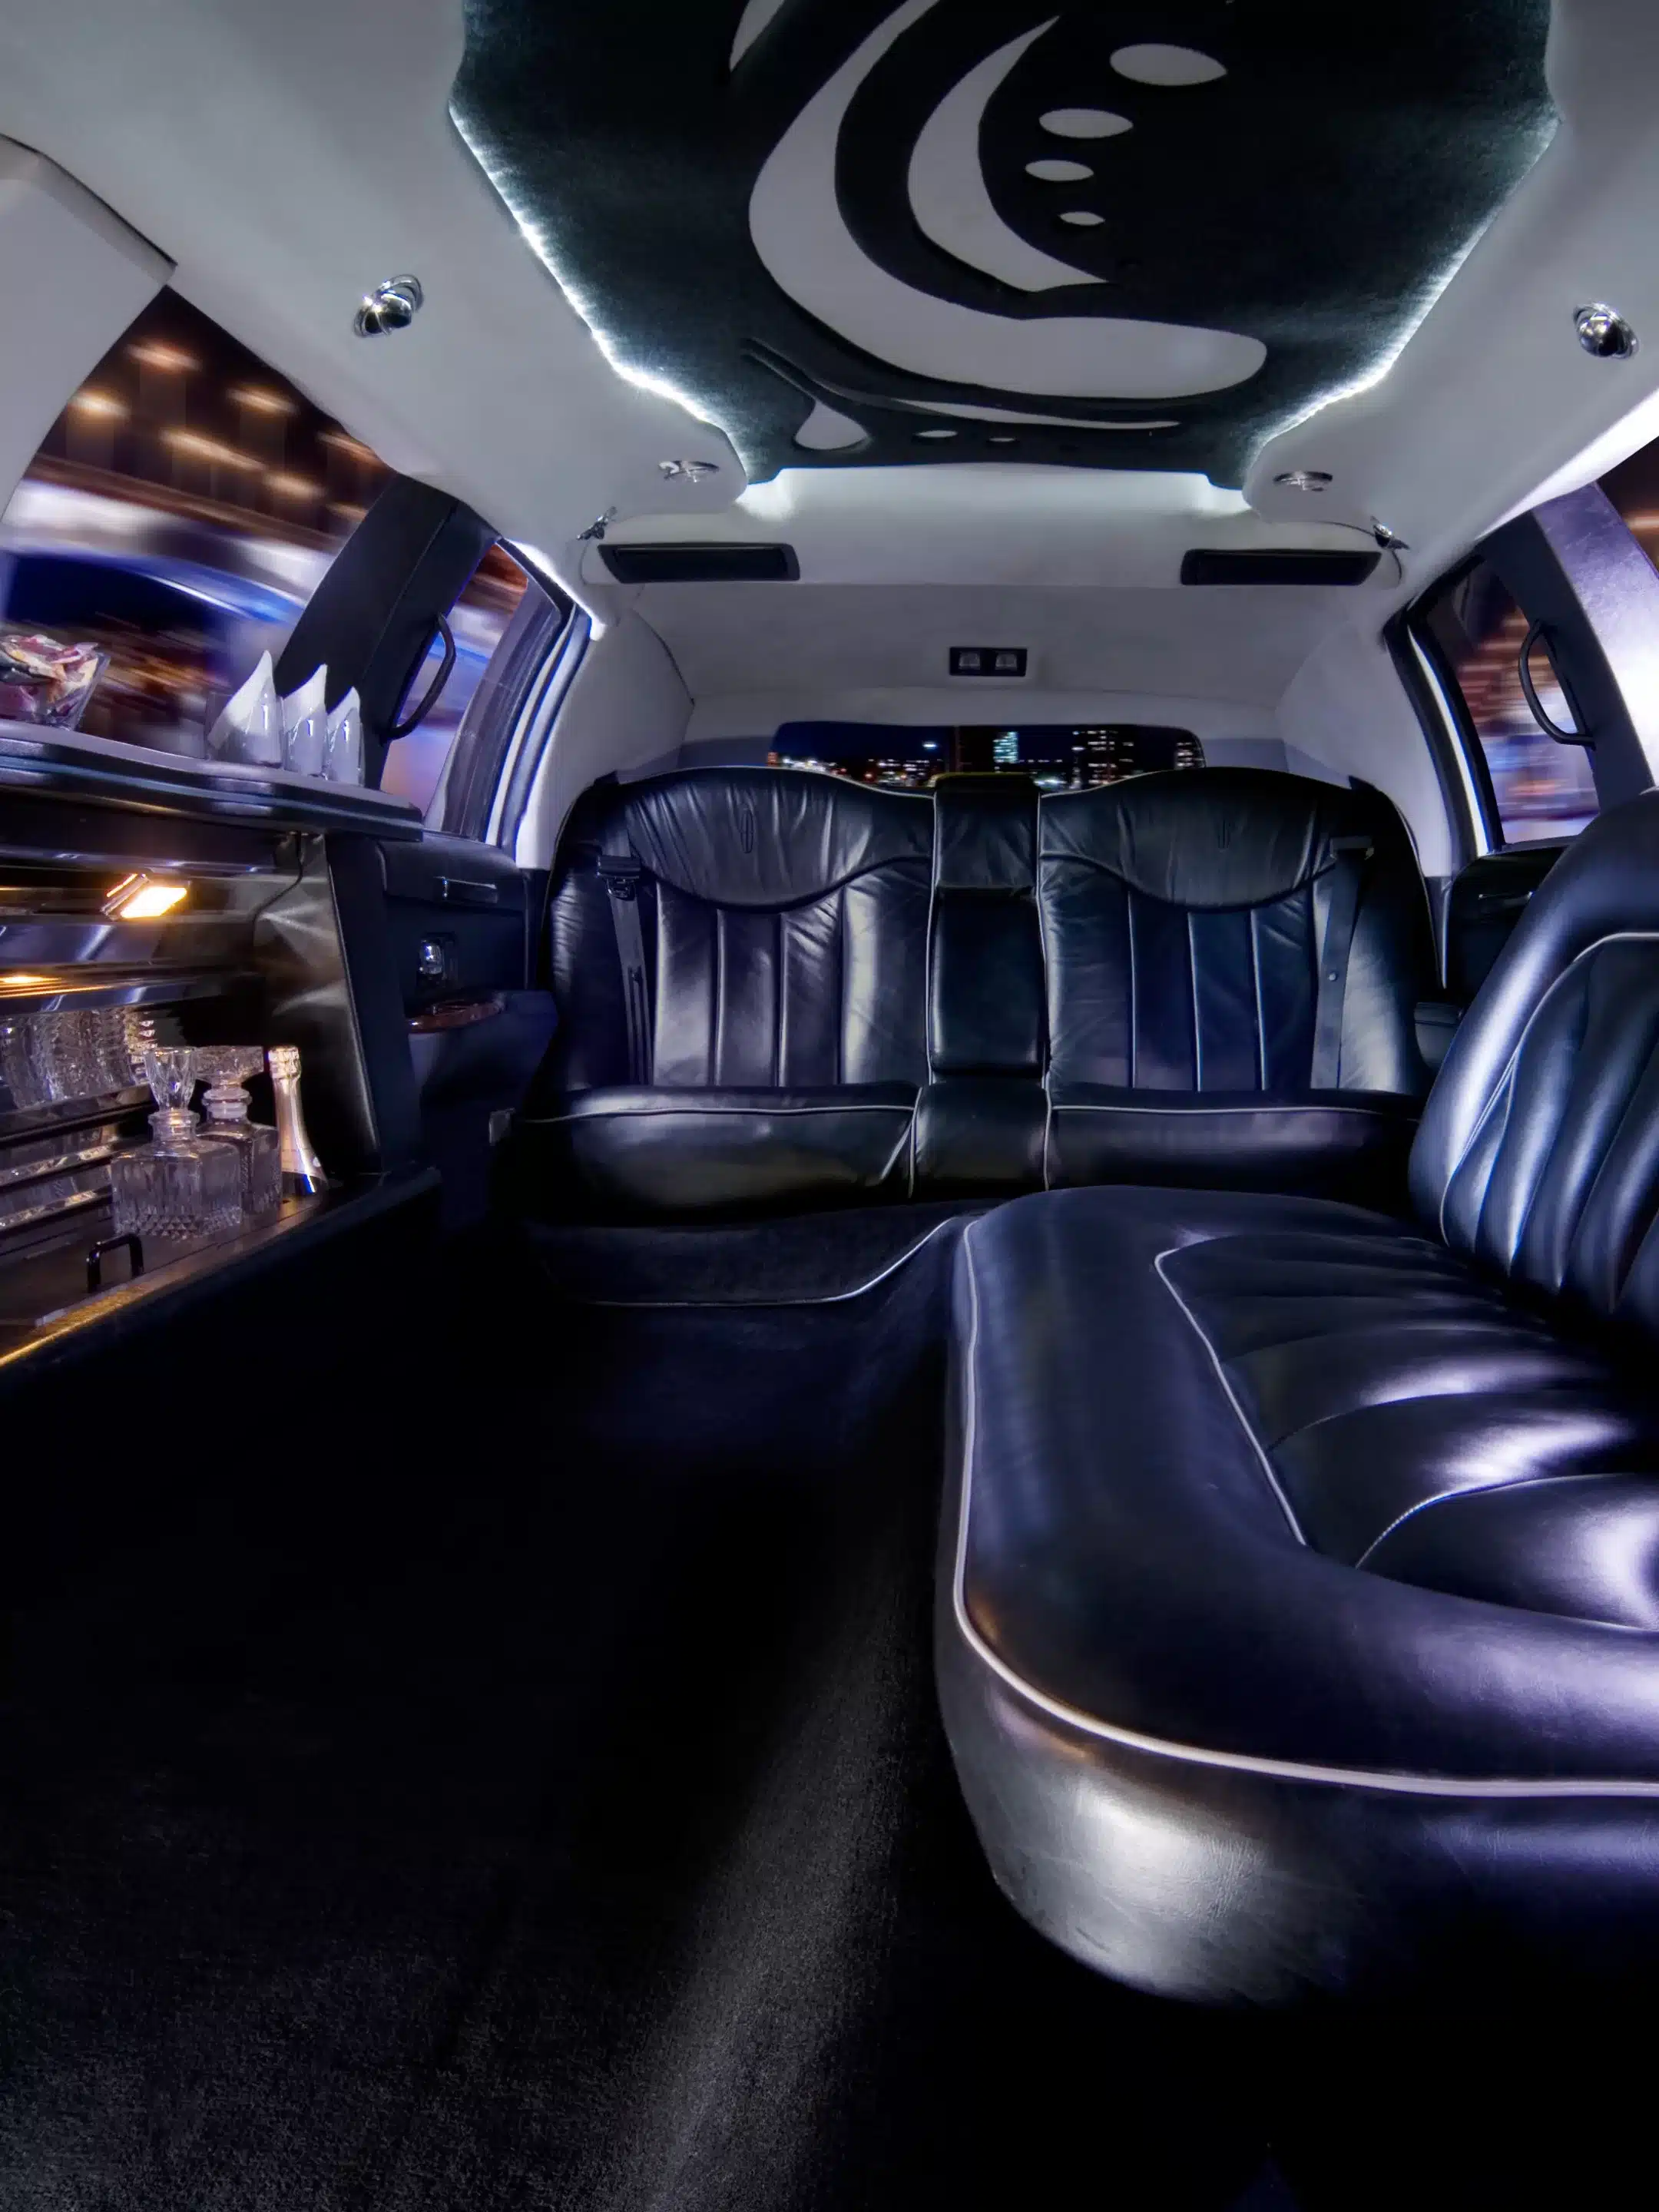 Bachelor Party Limo Service in Edmonton by SkipLine Parties!